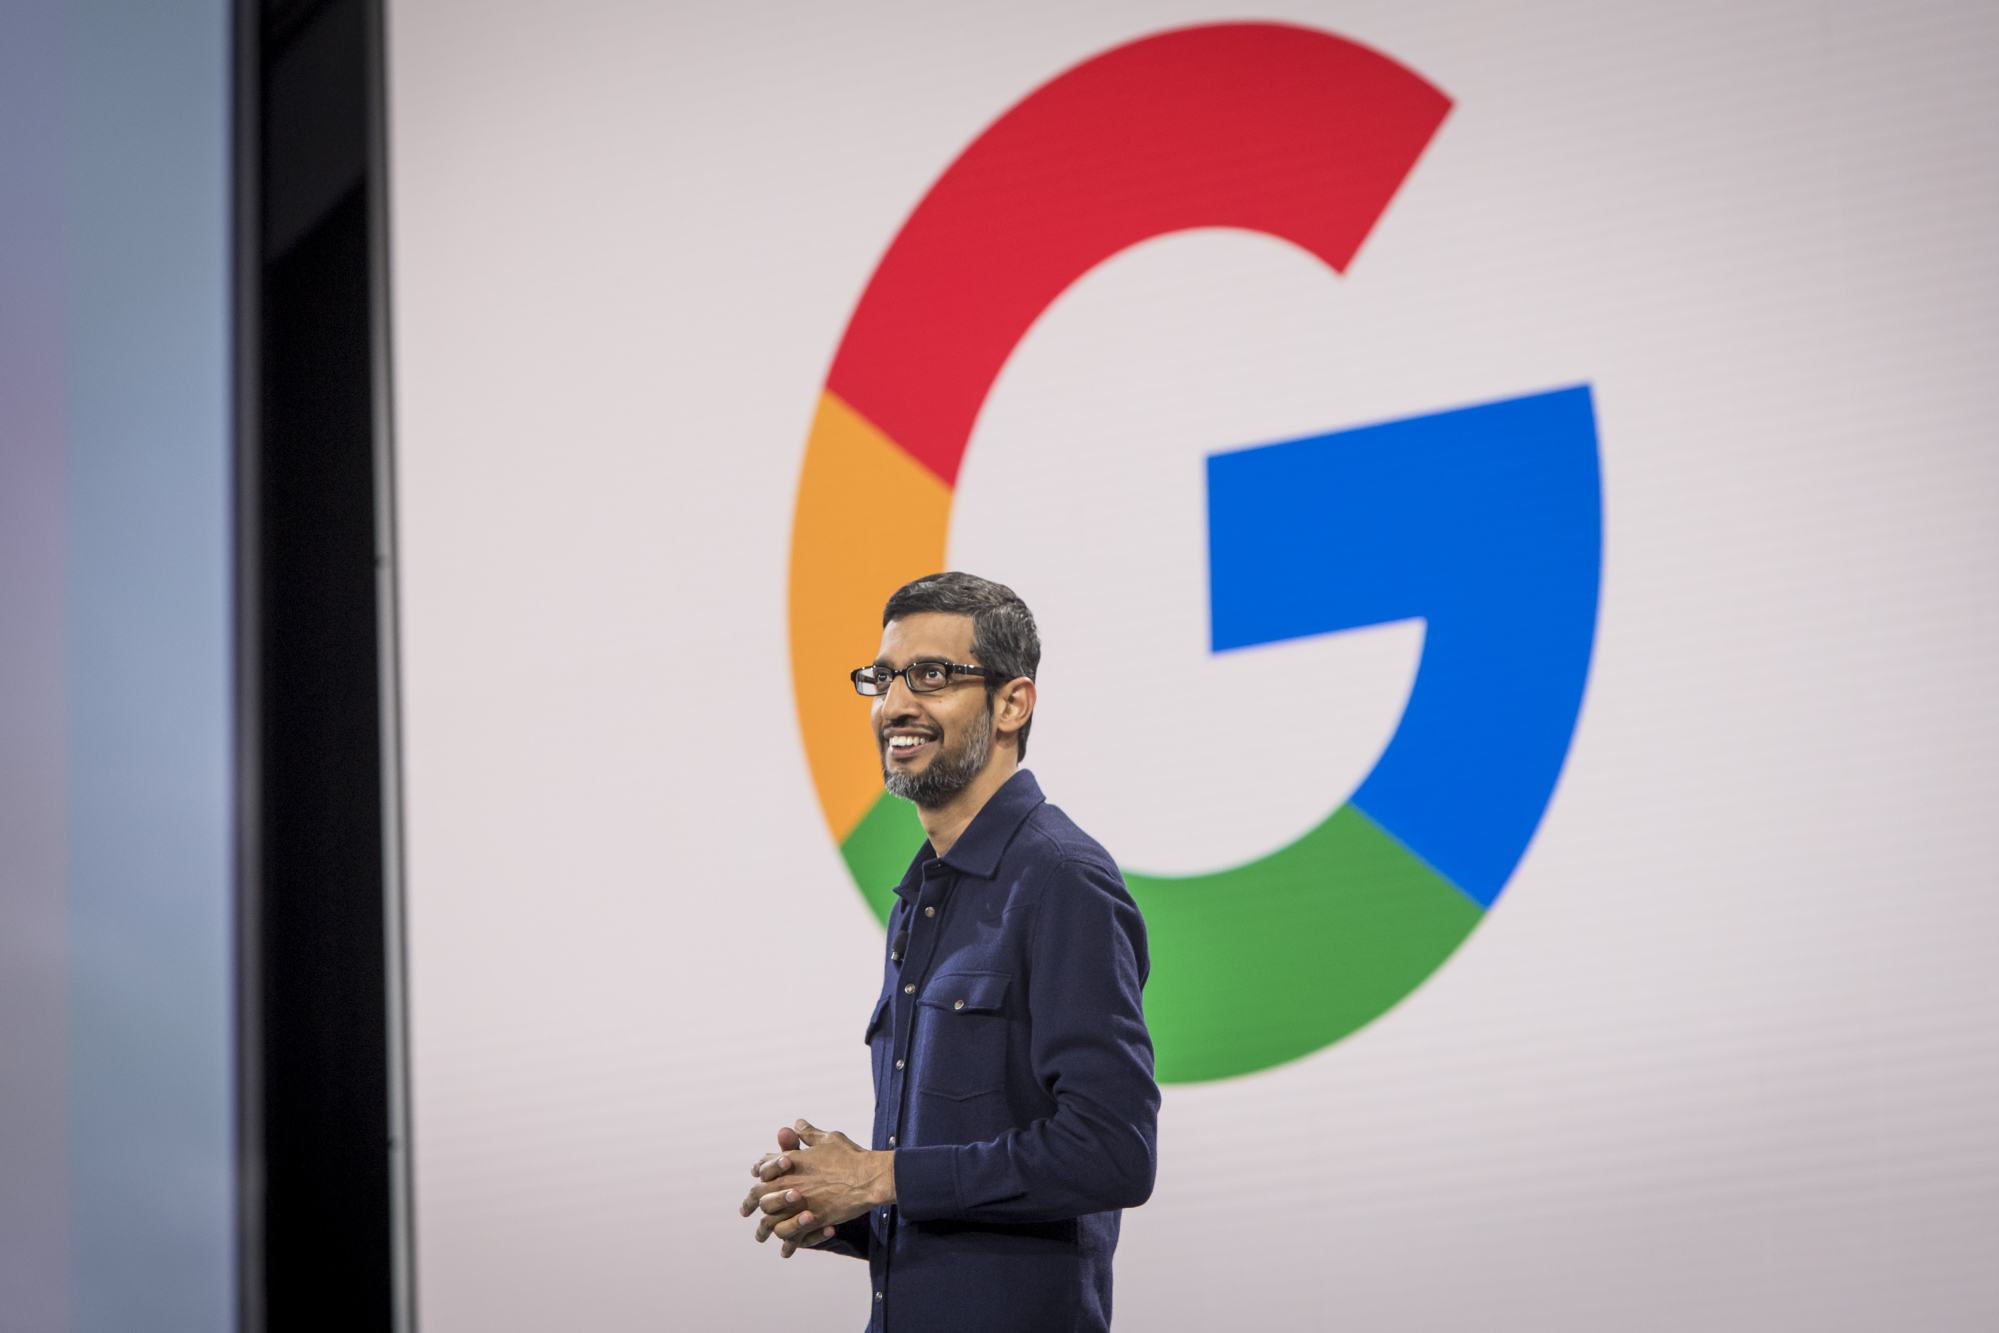 Google CEO Tells Staff China Plans Are 'Exploratory' After Backlash - Bloomberg